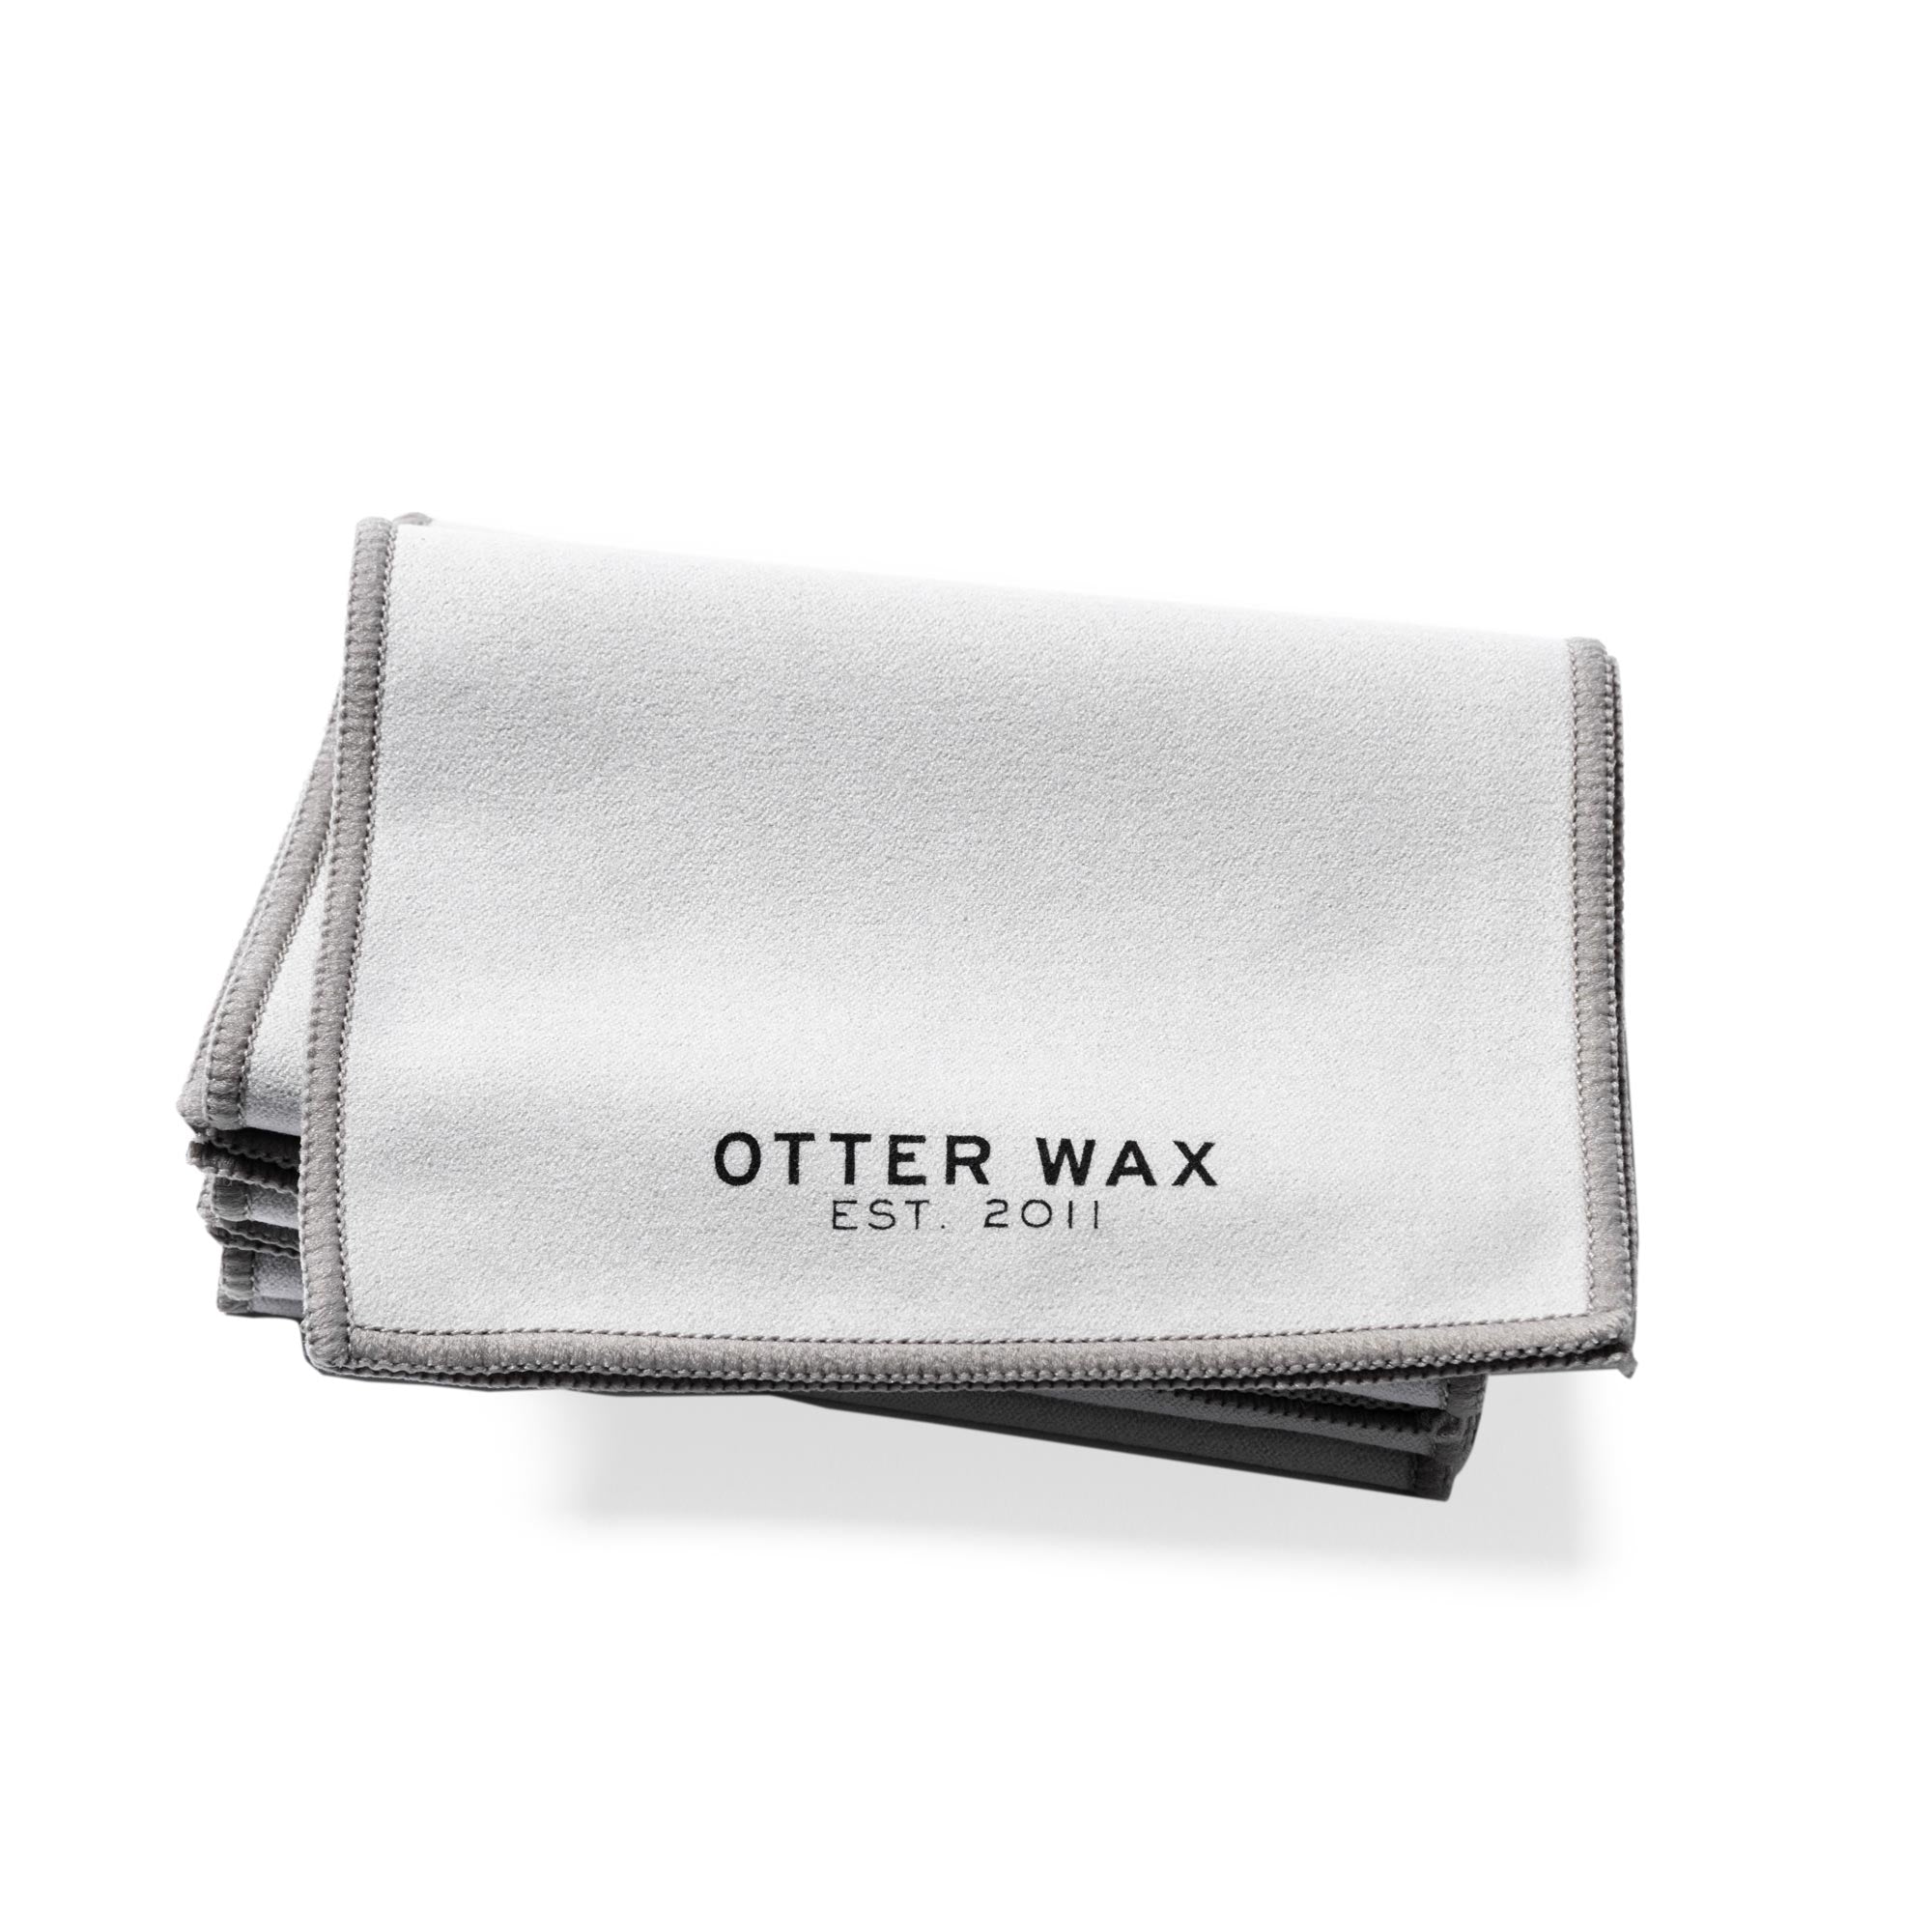 Otter Wax Lint-Free Flannel Buffing Cloth Best For Polishing And Shining Leather